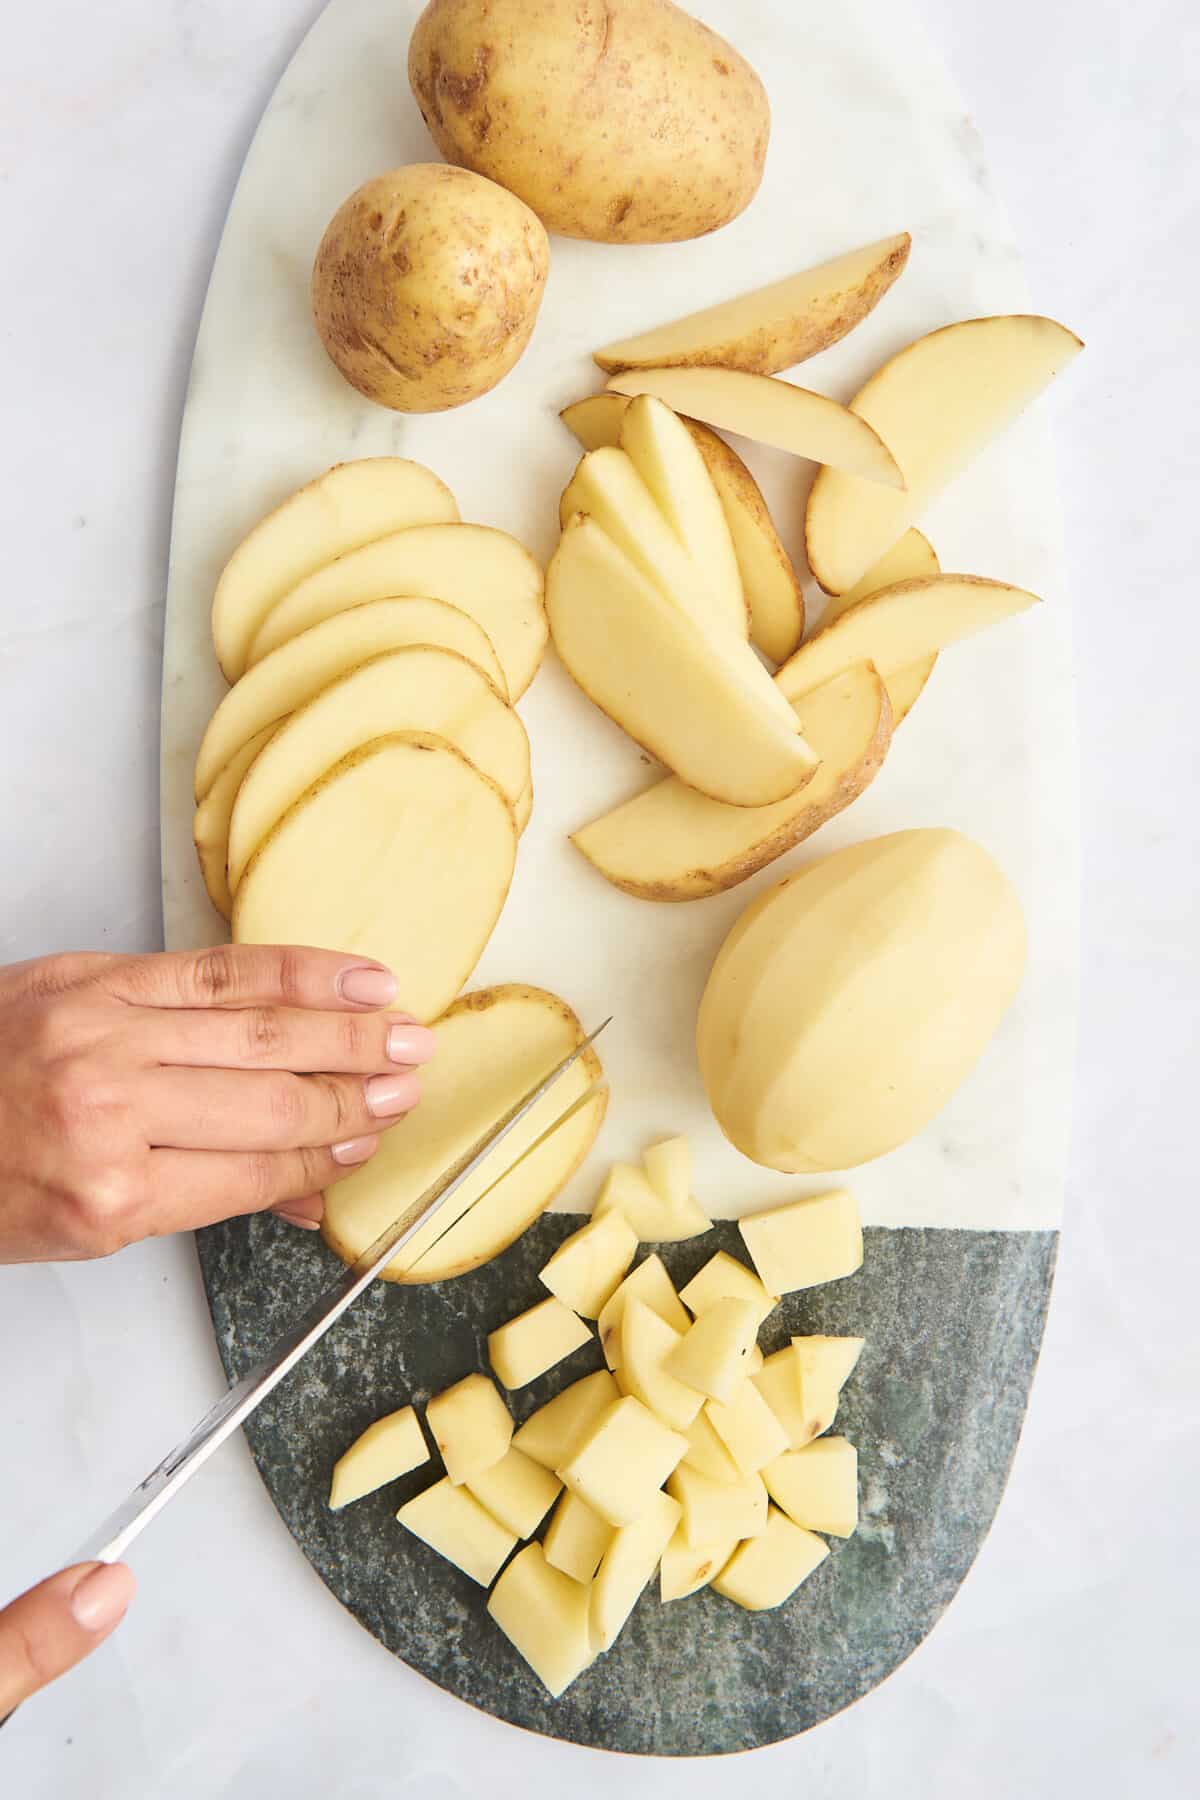 Whole potatoes, skinned potatoes, potato slices, cubes, and wedges. 